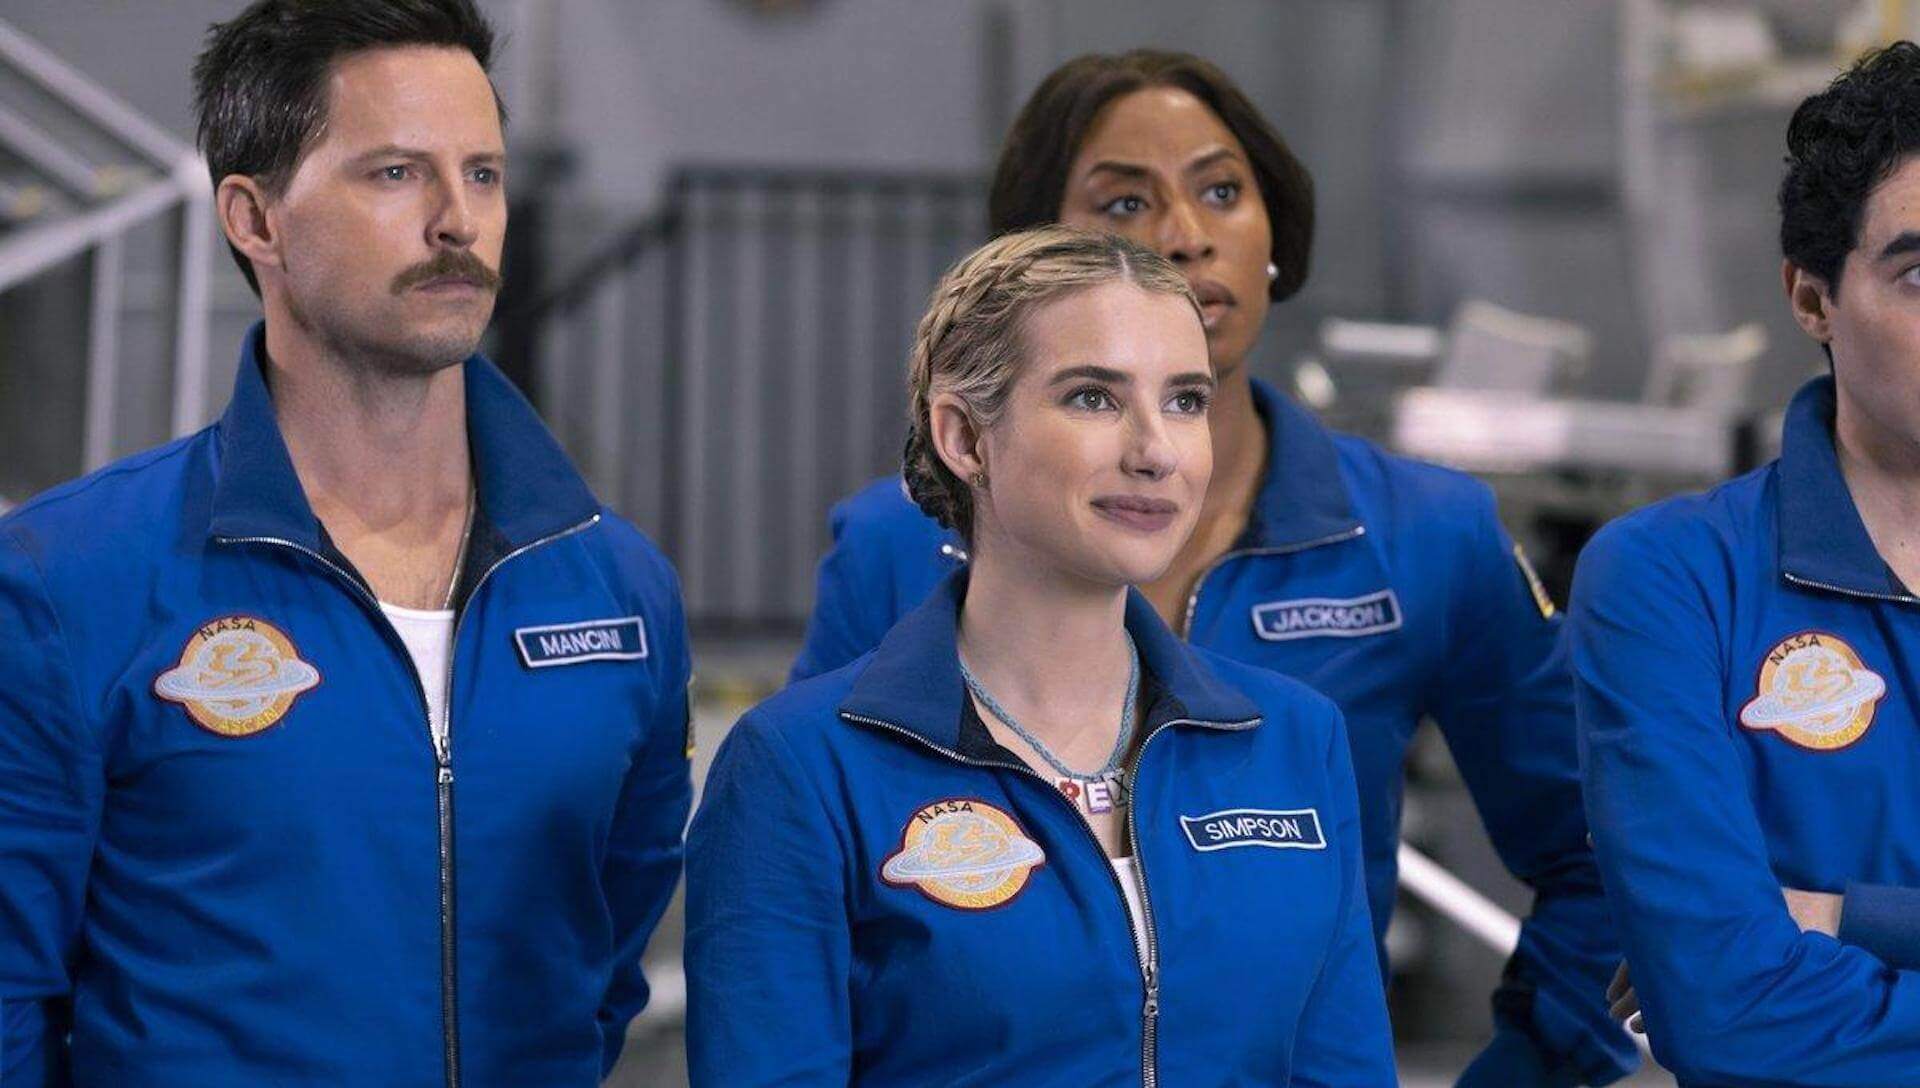 Rex (Emma Roberts) and a group of candidates in a NASA program in 'Space Cadet' 